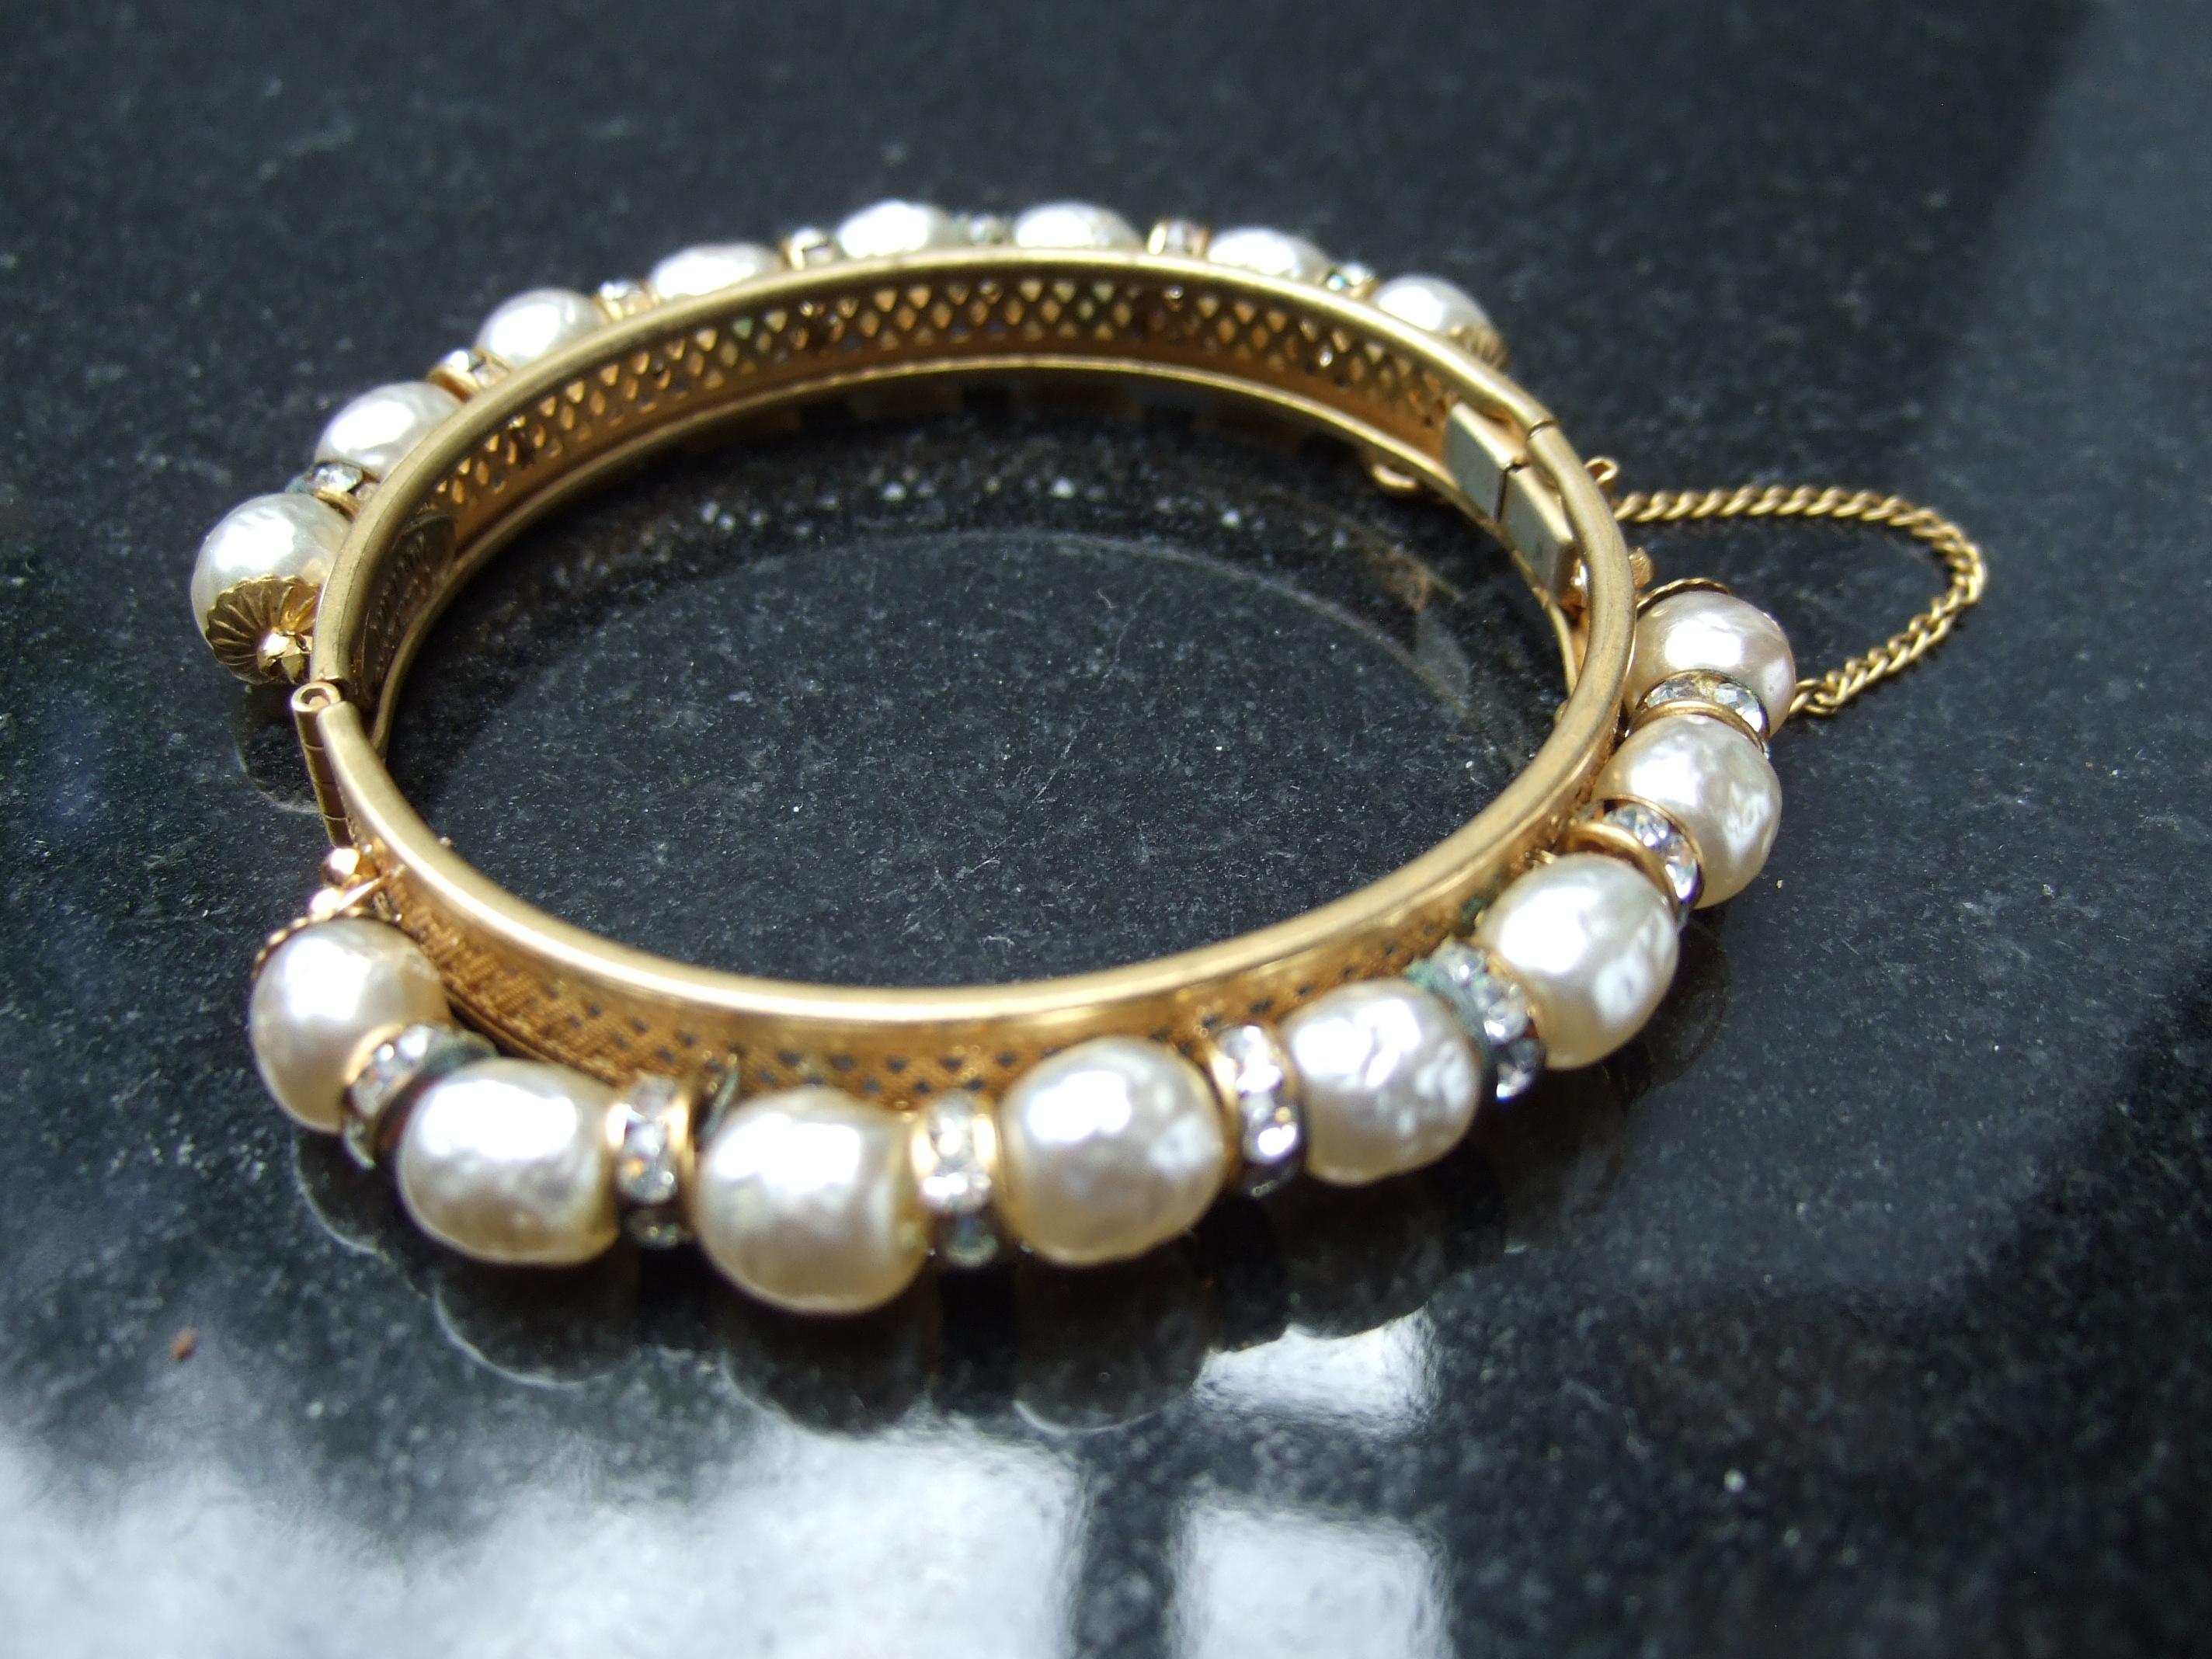 Miriam Haskell Elegant glass enamel pearl hinged bracelet c 1950s
The mid century brass filigree hinged bracelet is embellished 
with a band of glass enamel baroque style pearls juxtaposed 
with subtle clusters of clear diamante crystals 

The